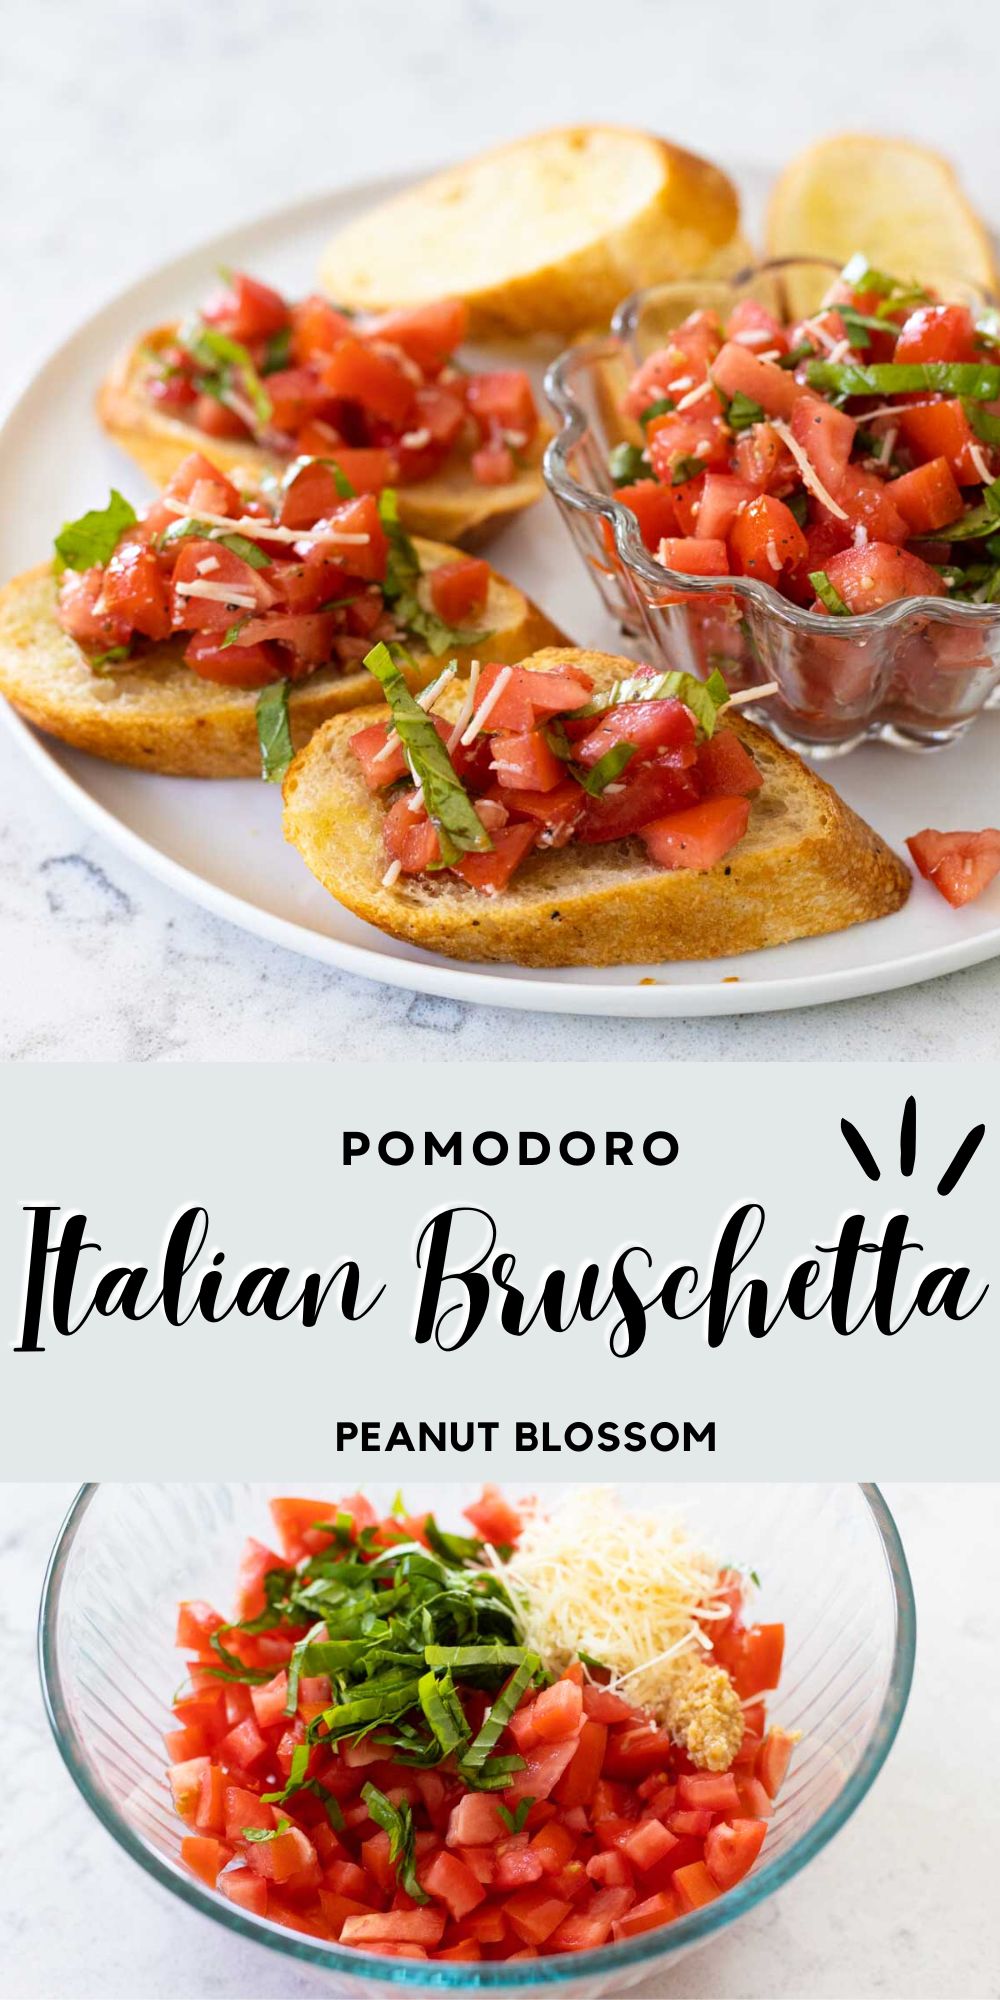 The photo collage shows the platter of bruschetta on crostini next to a mixing bowl filled with diced fresh tomatoes and basil.